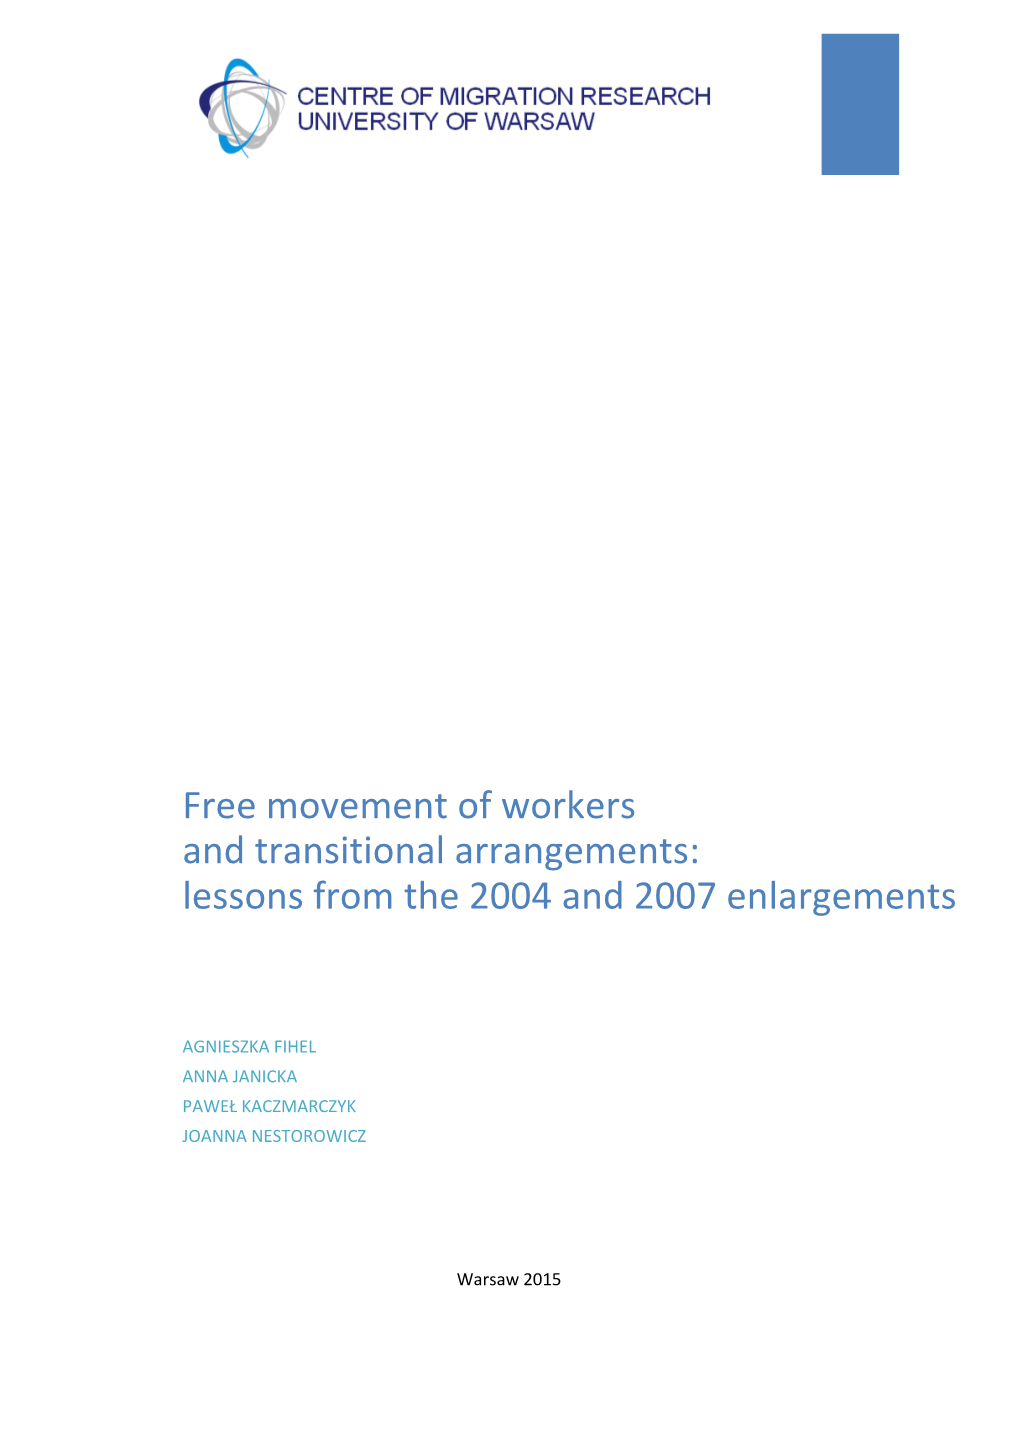 Free Movement of Workers and Transitional Arrangements: Lessons from the 2004 and 2007 Enlargements